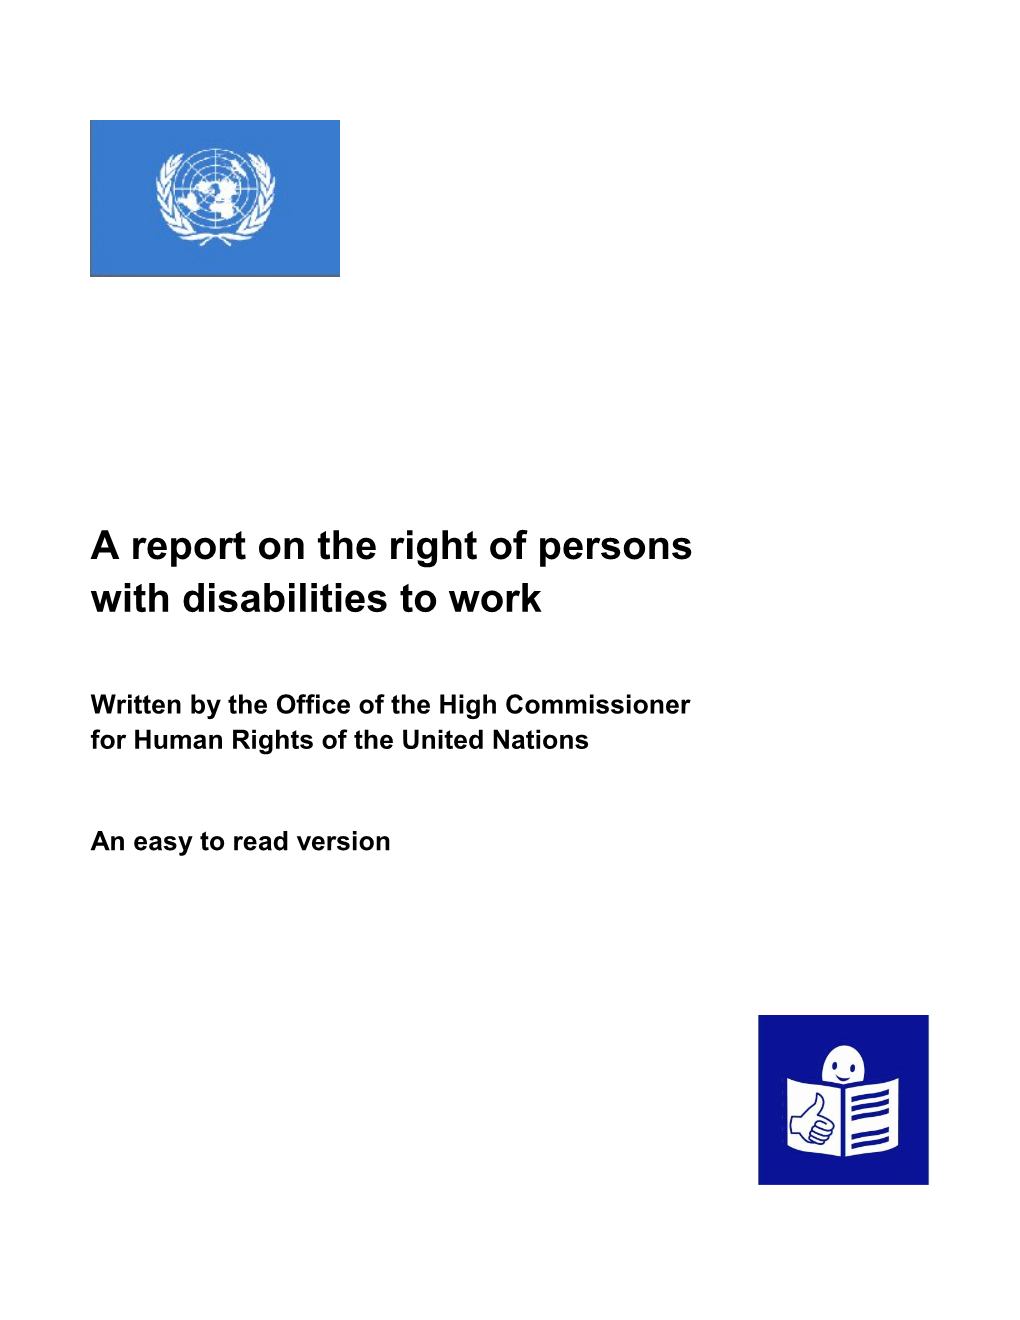 A Report on the Right of Persons with Disabilities to Work